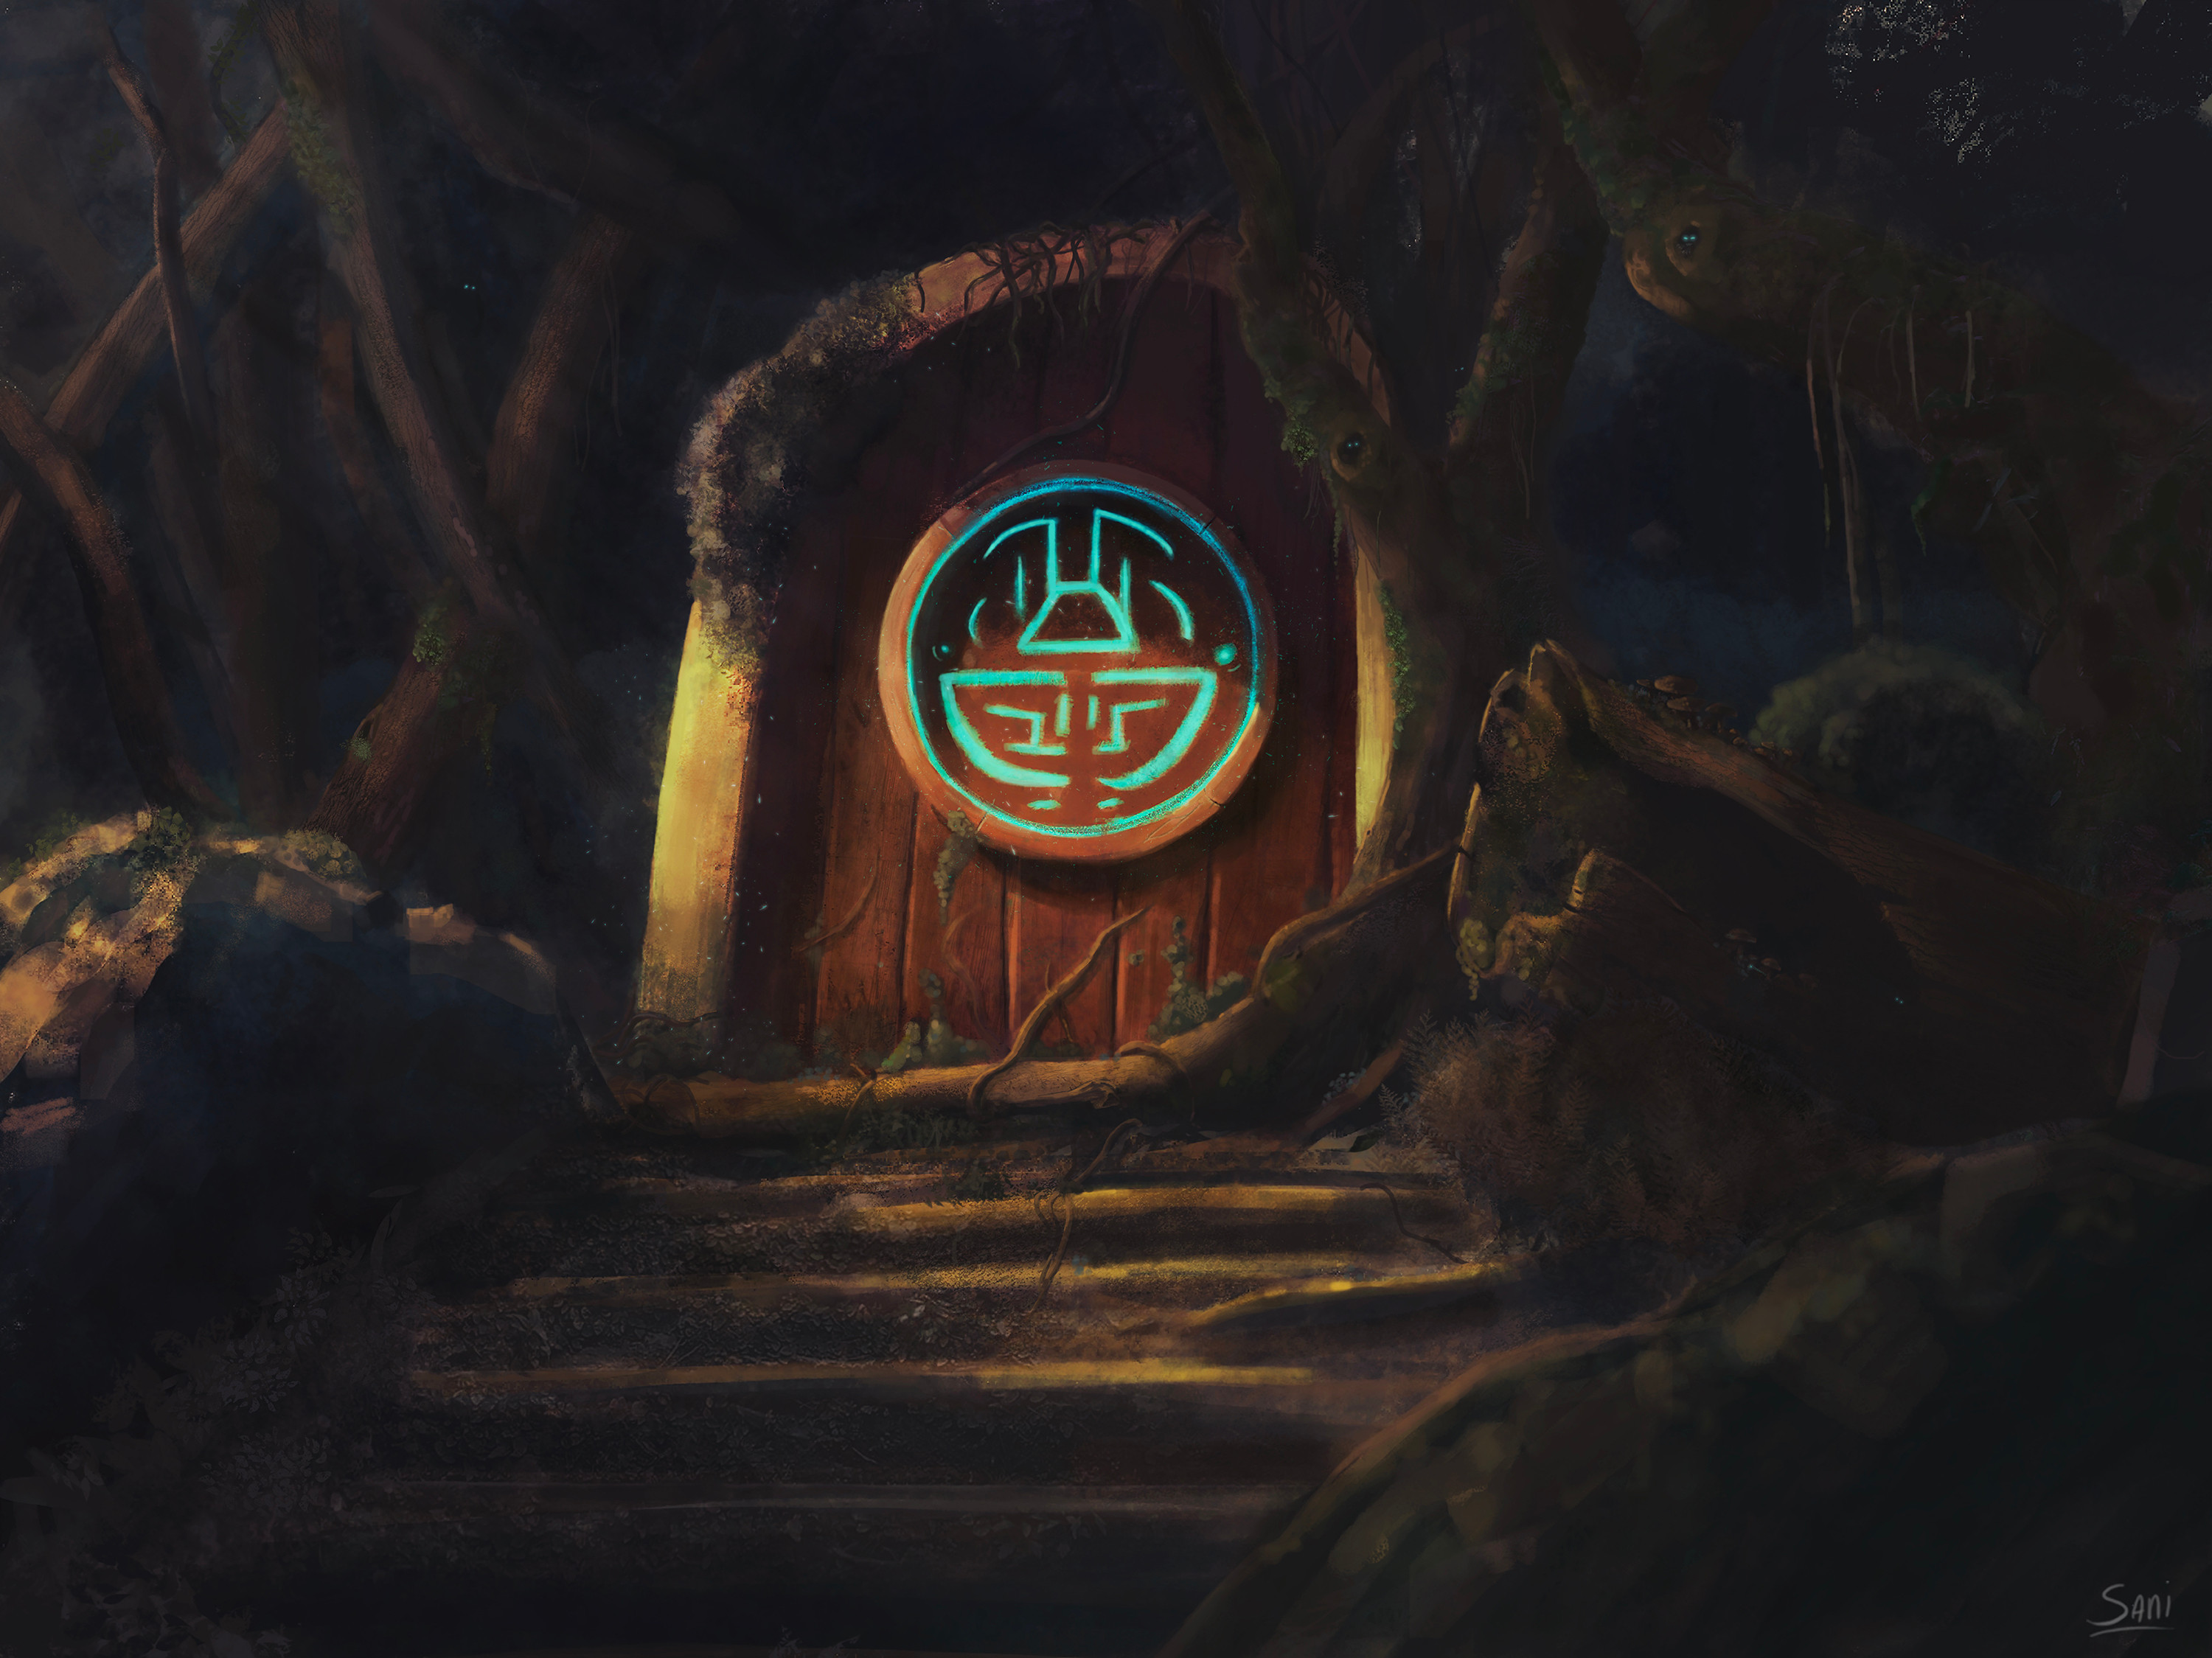 Door of Etea is a visual development piece for "Aya the Spirit whisperer". 

More pieces coming up soon!